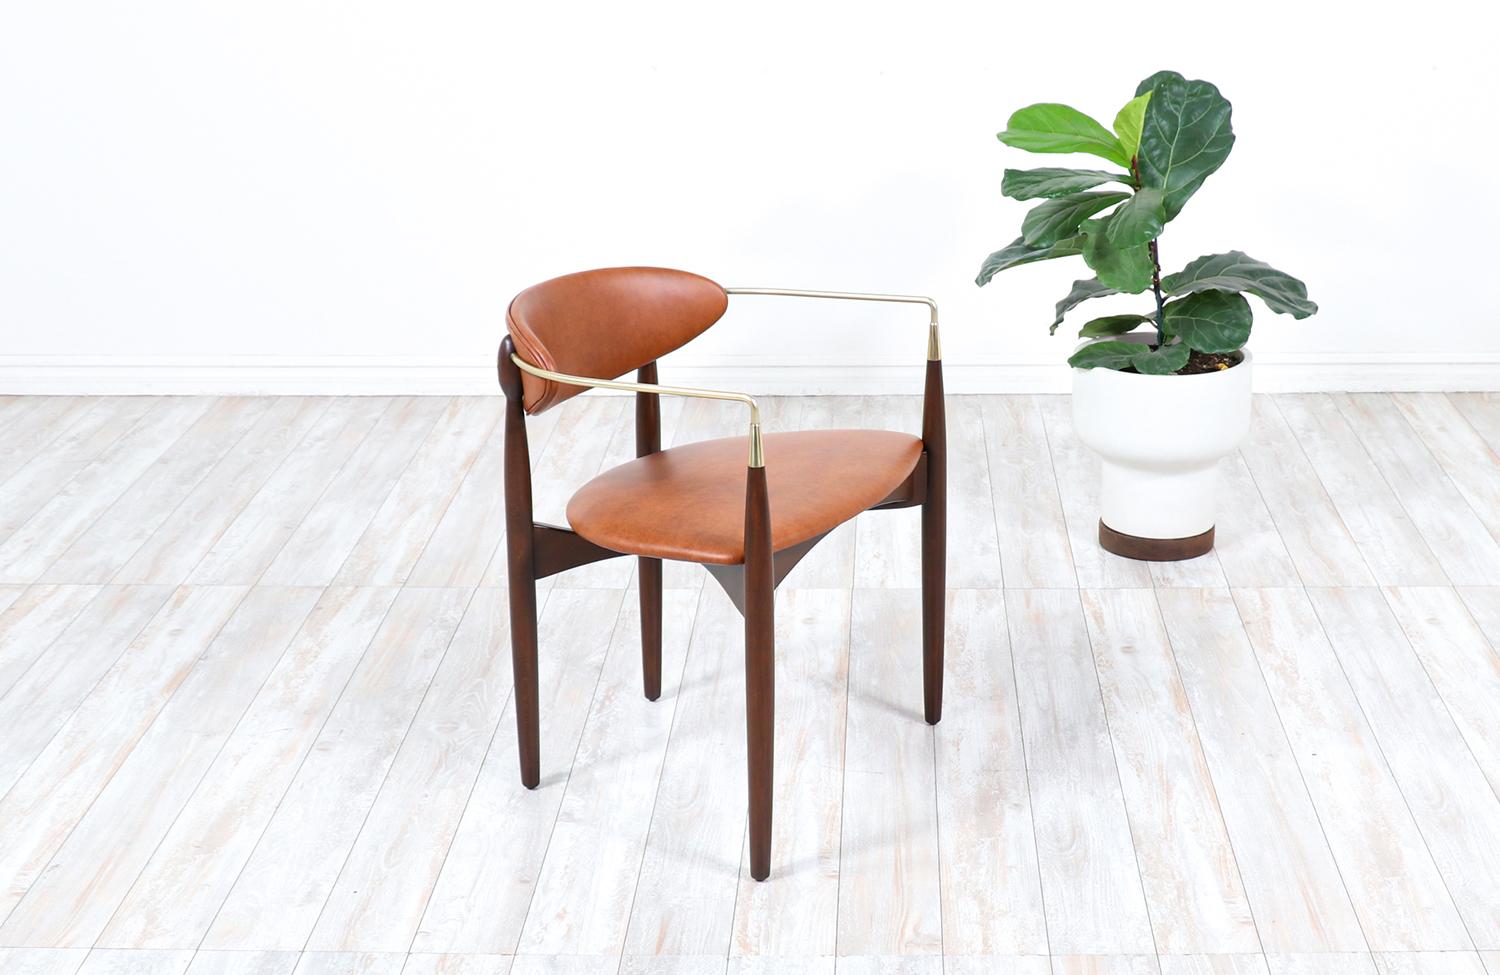 Mid Century Modern “Viscount” armchair designed by Dan Johnson for Selig in Denmark circa 1950’s. This elegant design features a newly refinished walnut wood frame and freshly polished tubular brass arms. The upholstery is new full grain cognac